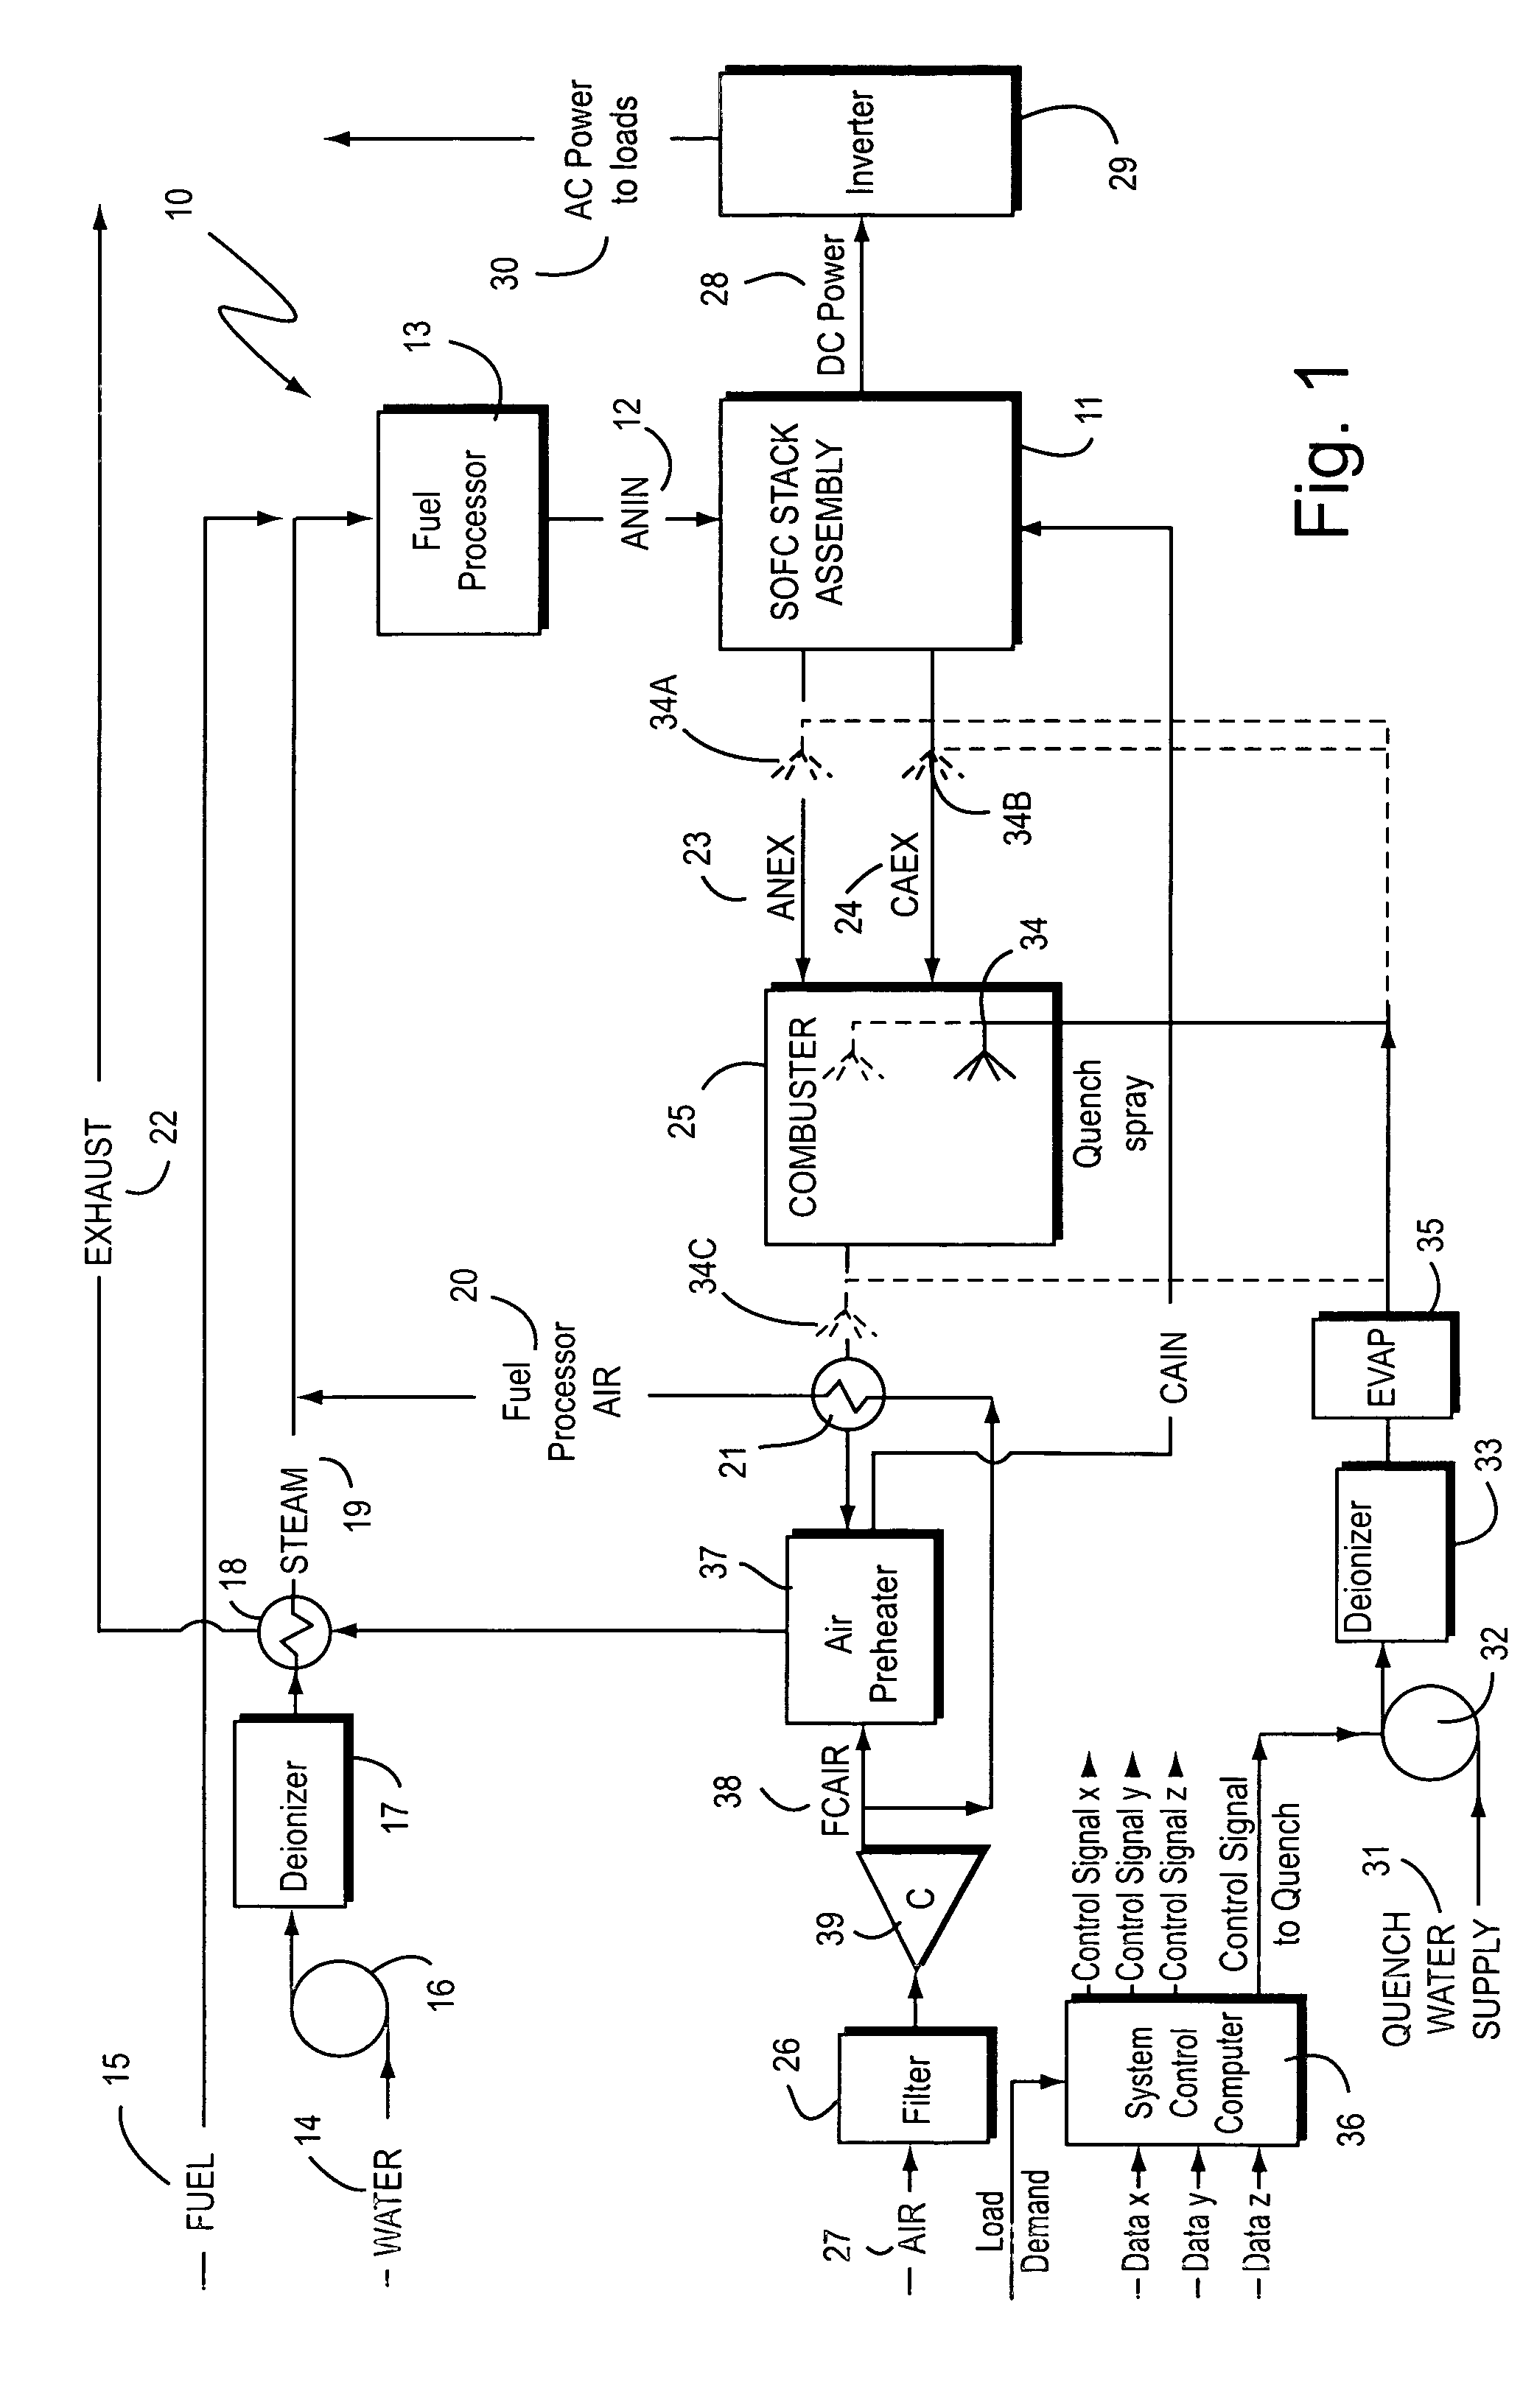 High temperature protection of fuel cell system combustor and other components via water or water vapor injection